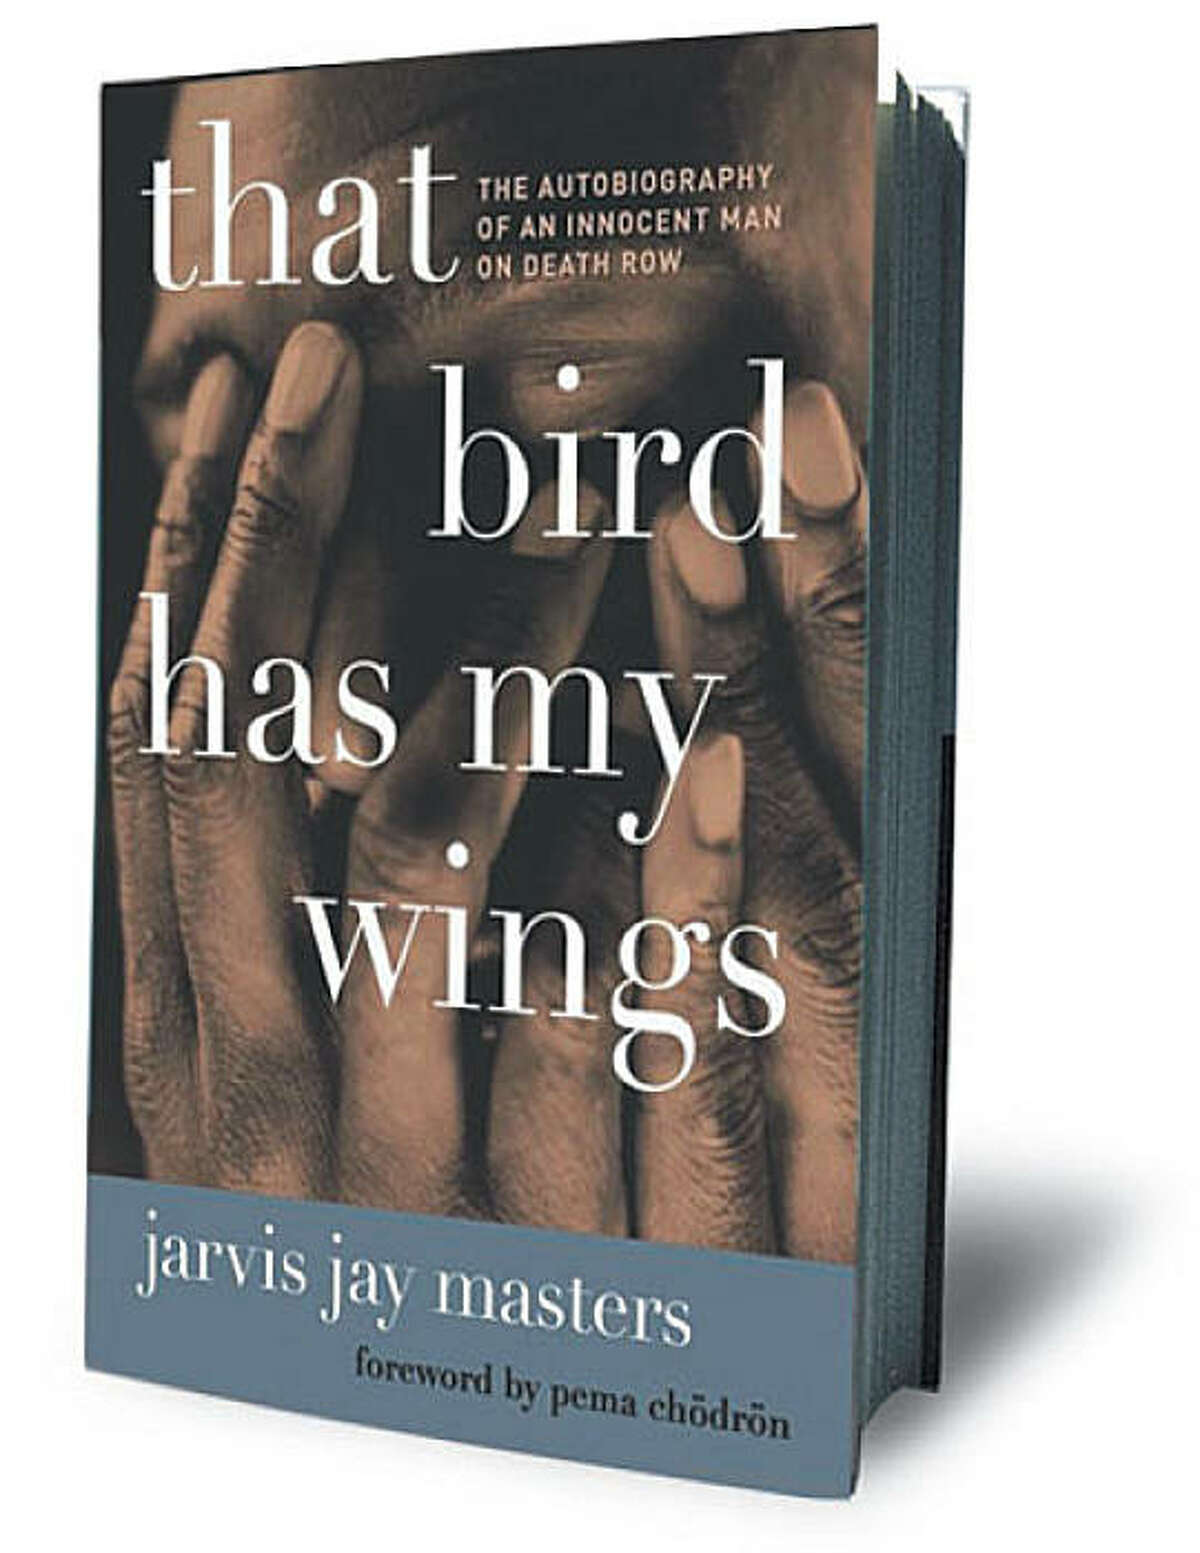 That Bird Has My Wings: The Autobiography of an Innocent Man on Death Row (Hardcover) by Jarvis Jay Masters